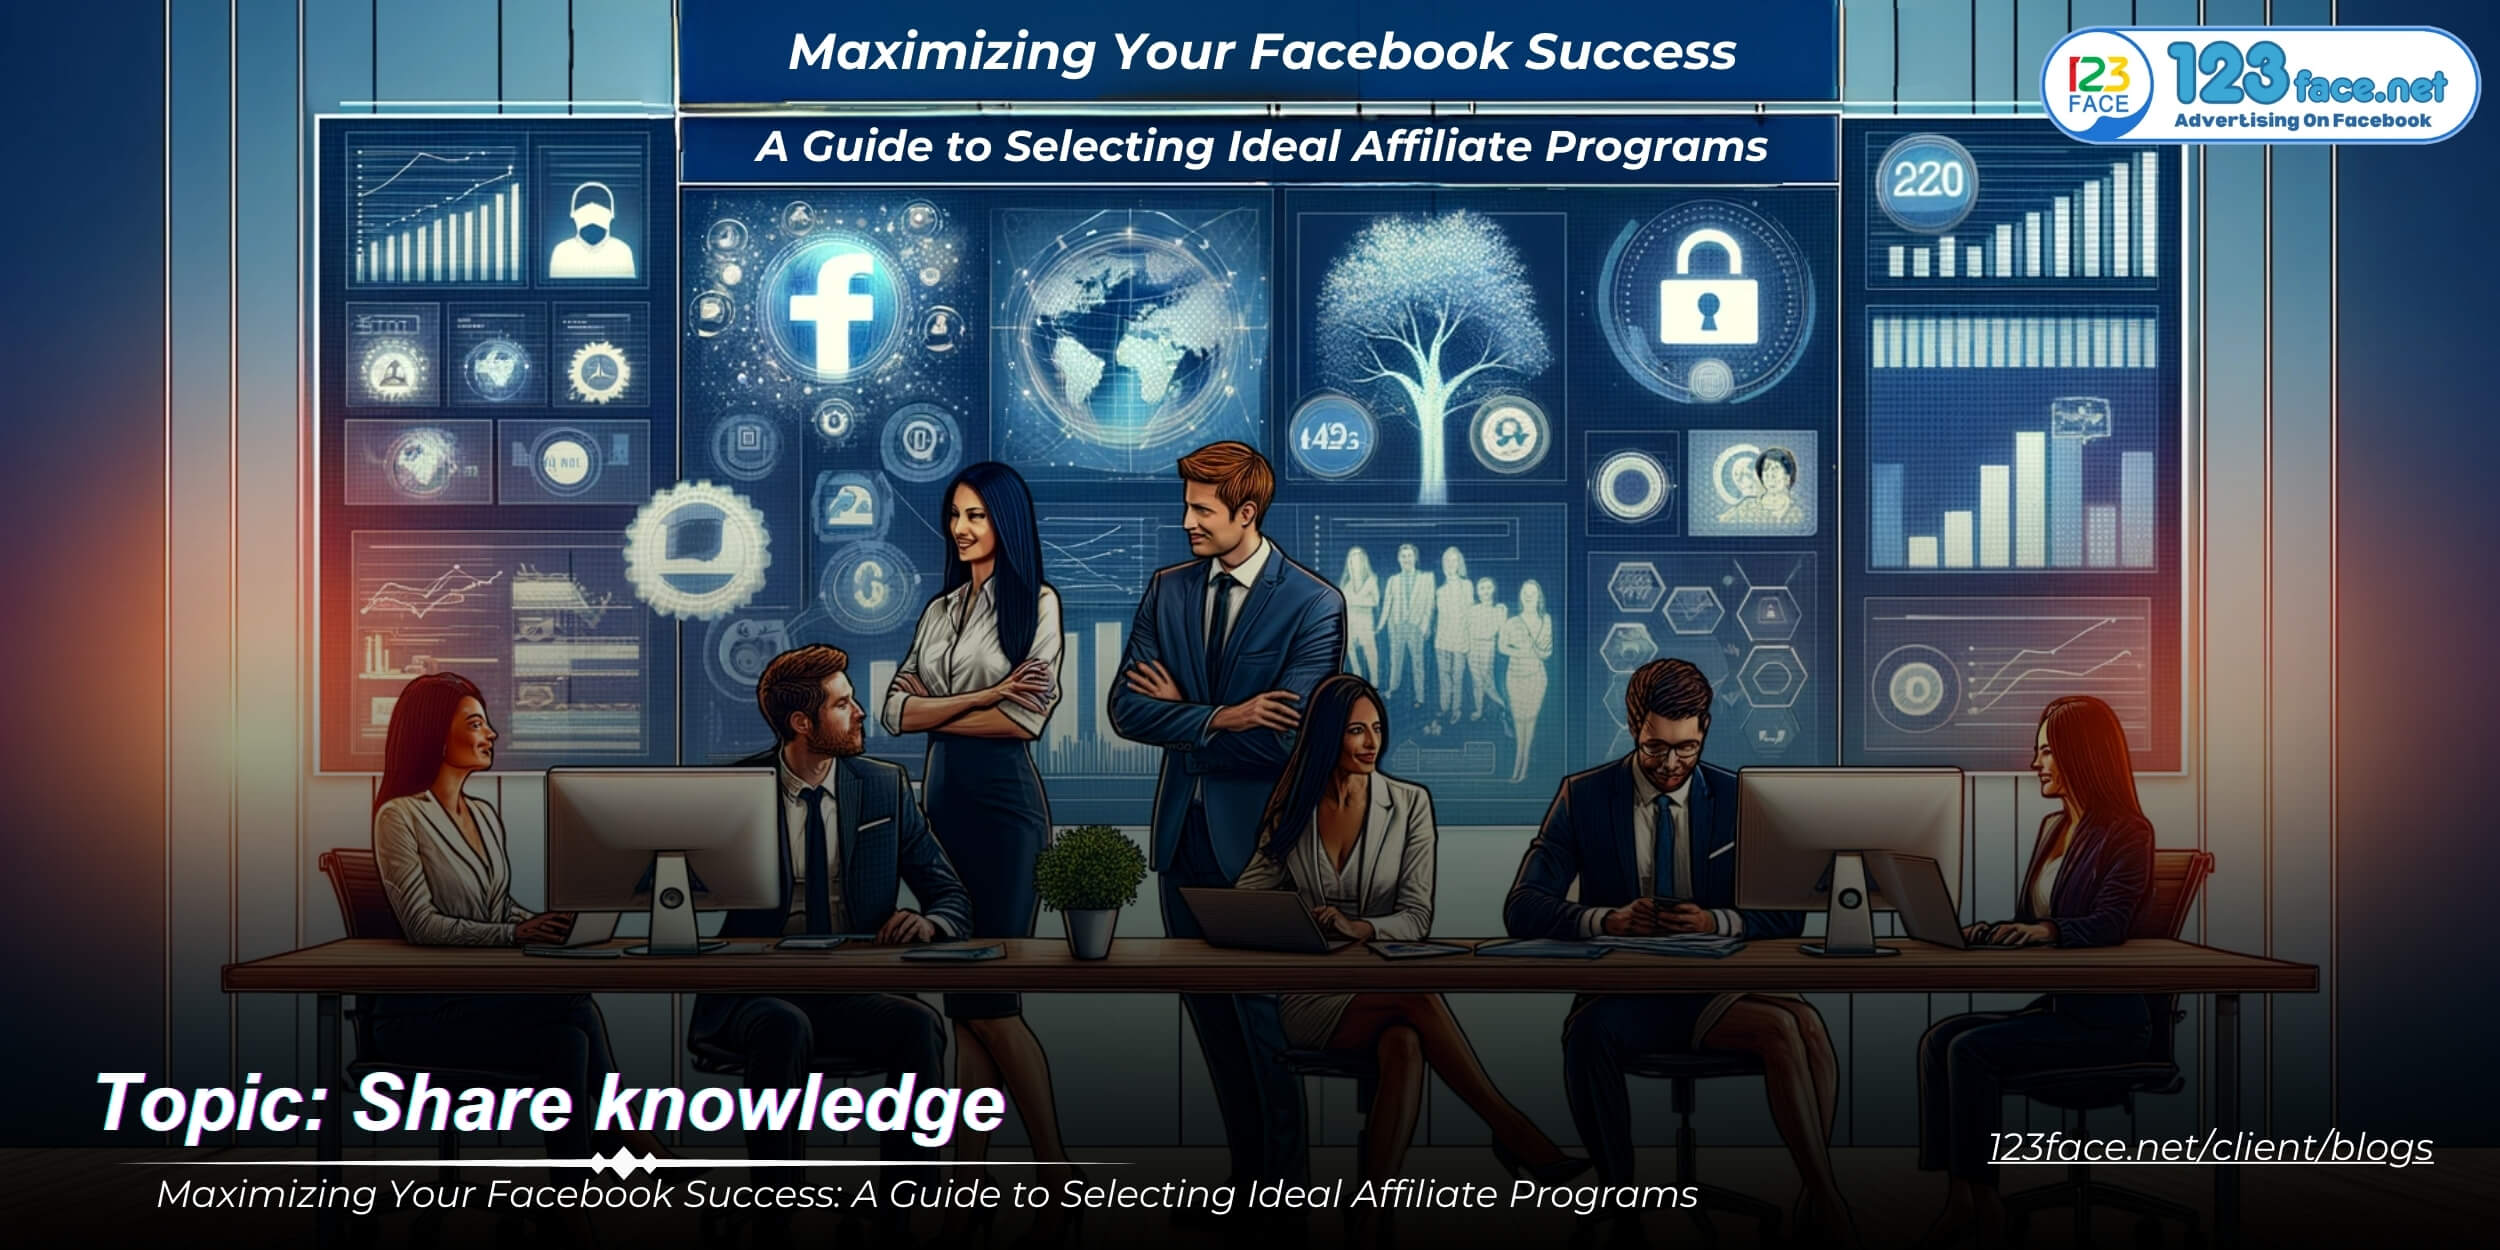 Maximizing Your Facebook Success: A Guide to Selecting Ideal Affiliate Programs